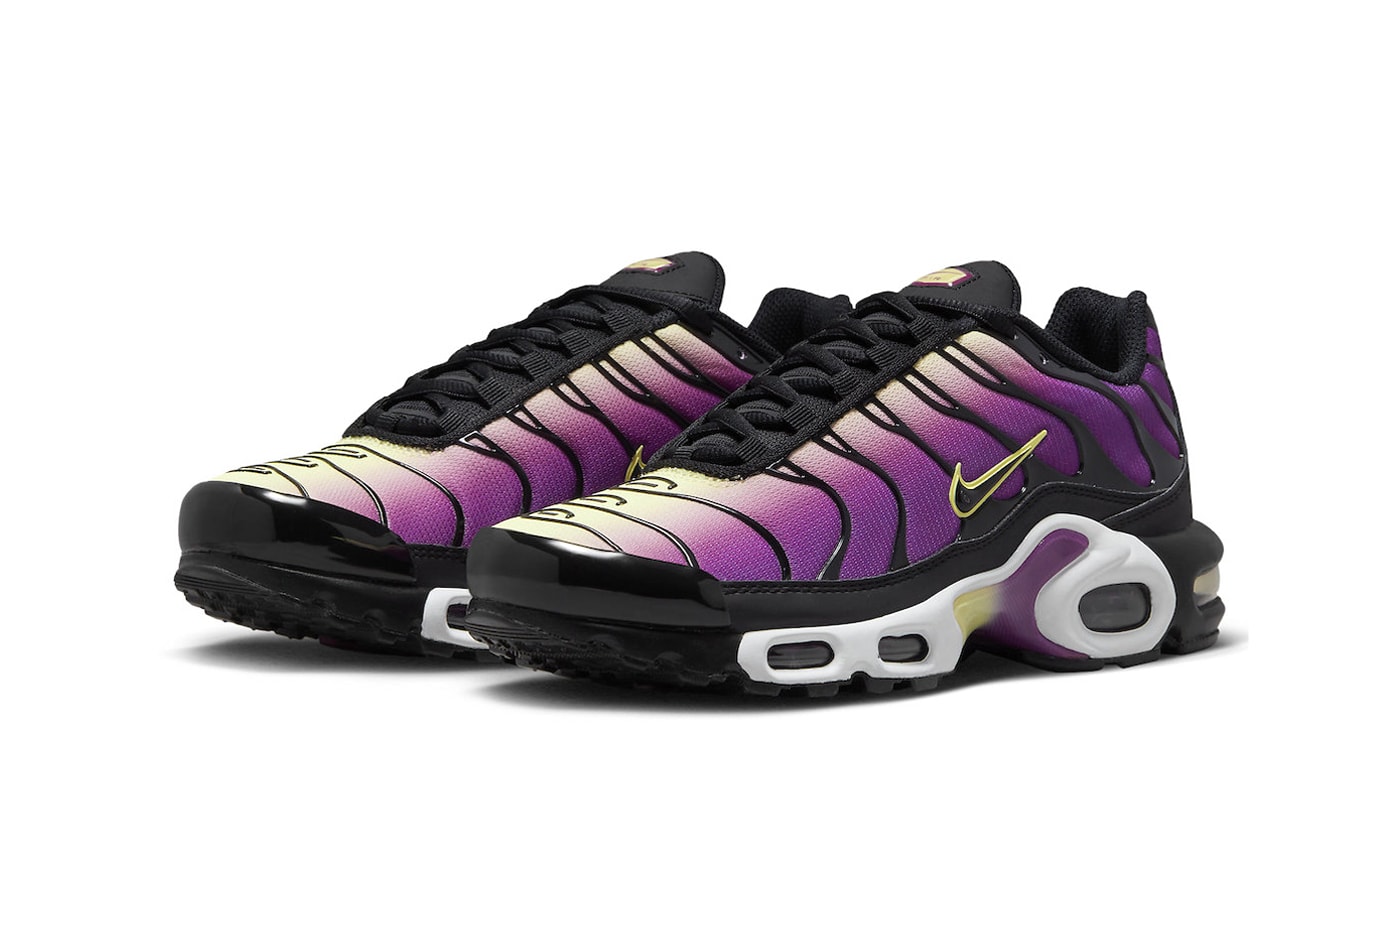 Latest Nike Air Max Plus Appears in NOCTA-Inspired Purple/Yellow Gradient FN3485-001 drake swoosh heat tech puchisa pale yellow